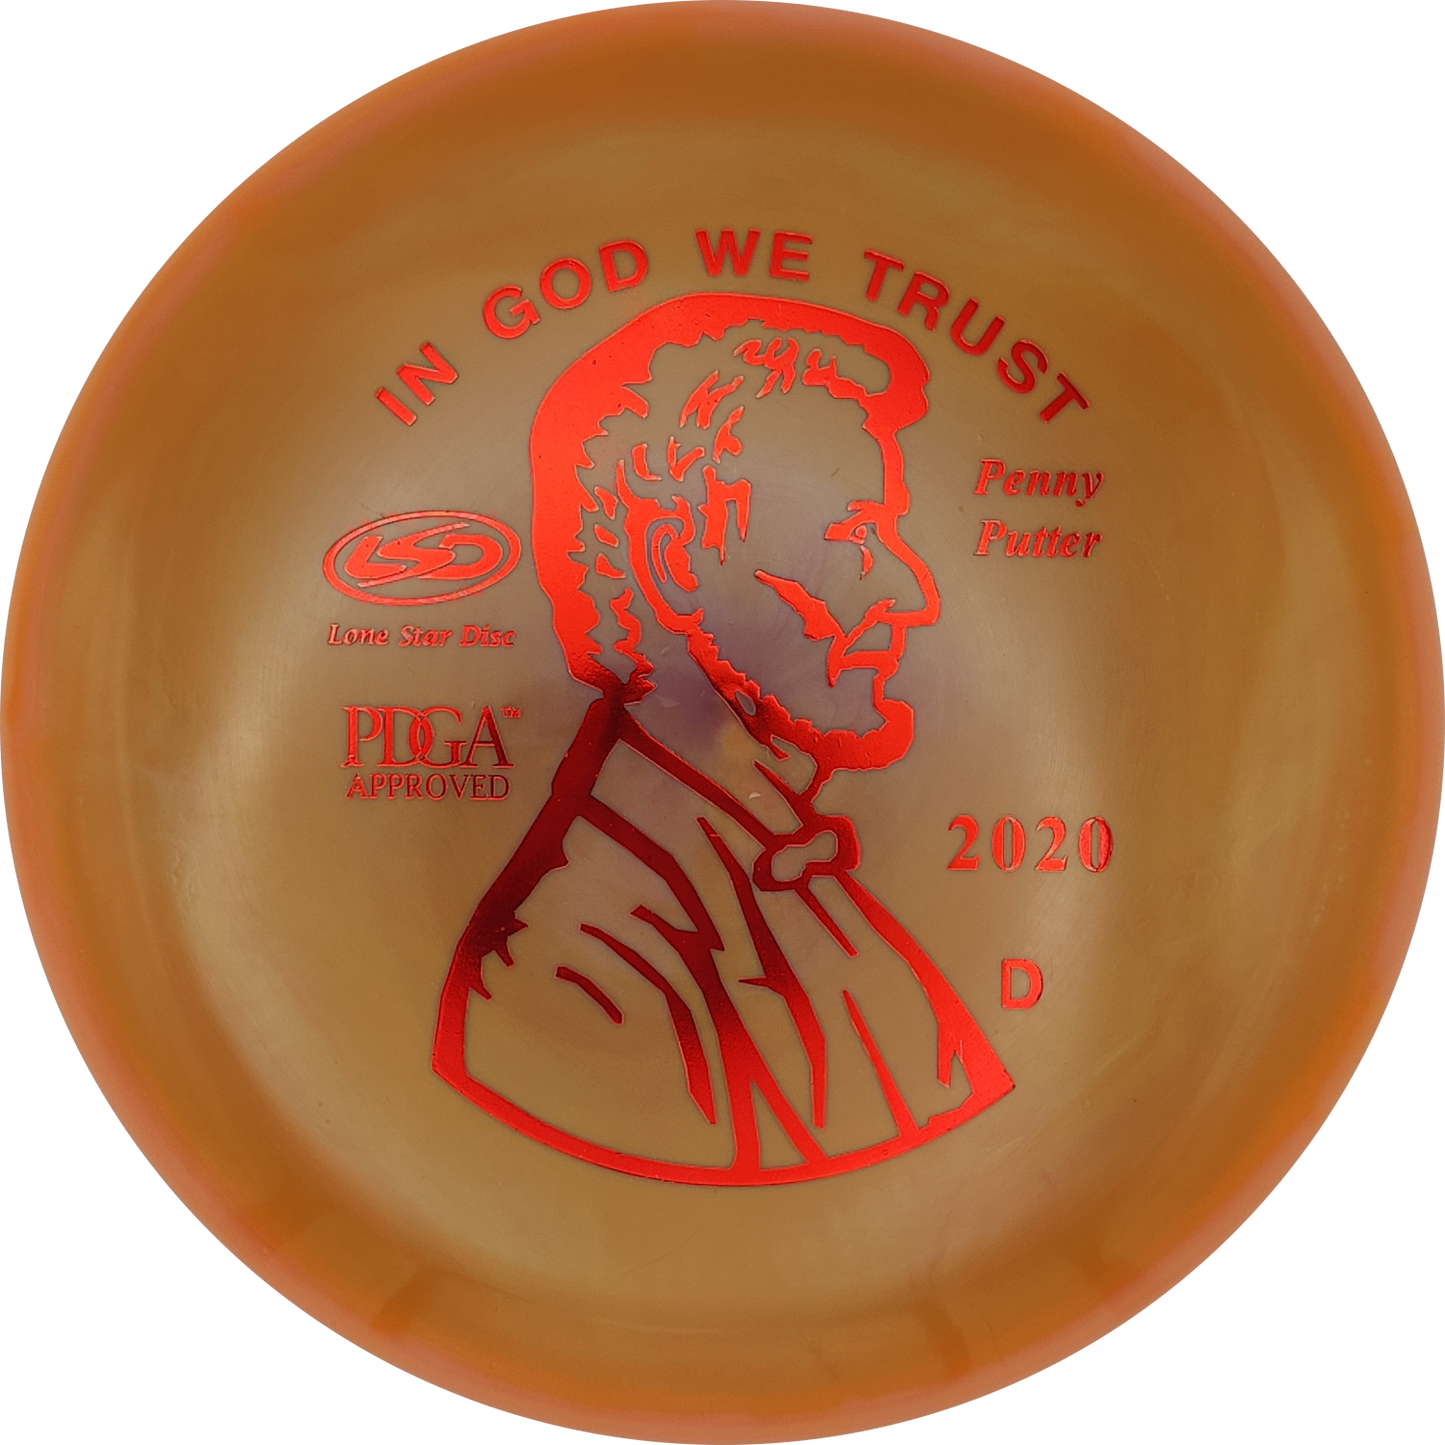 Lone Star Disc Penny Putter Alpha